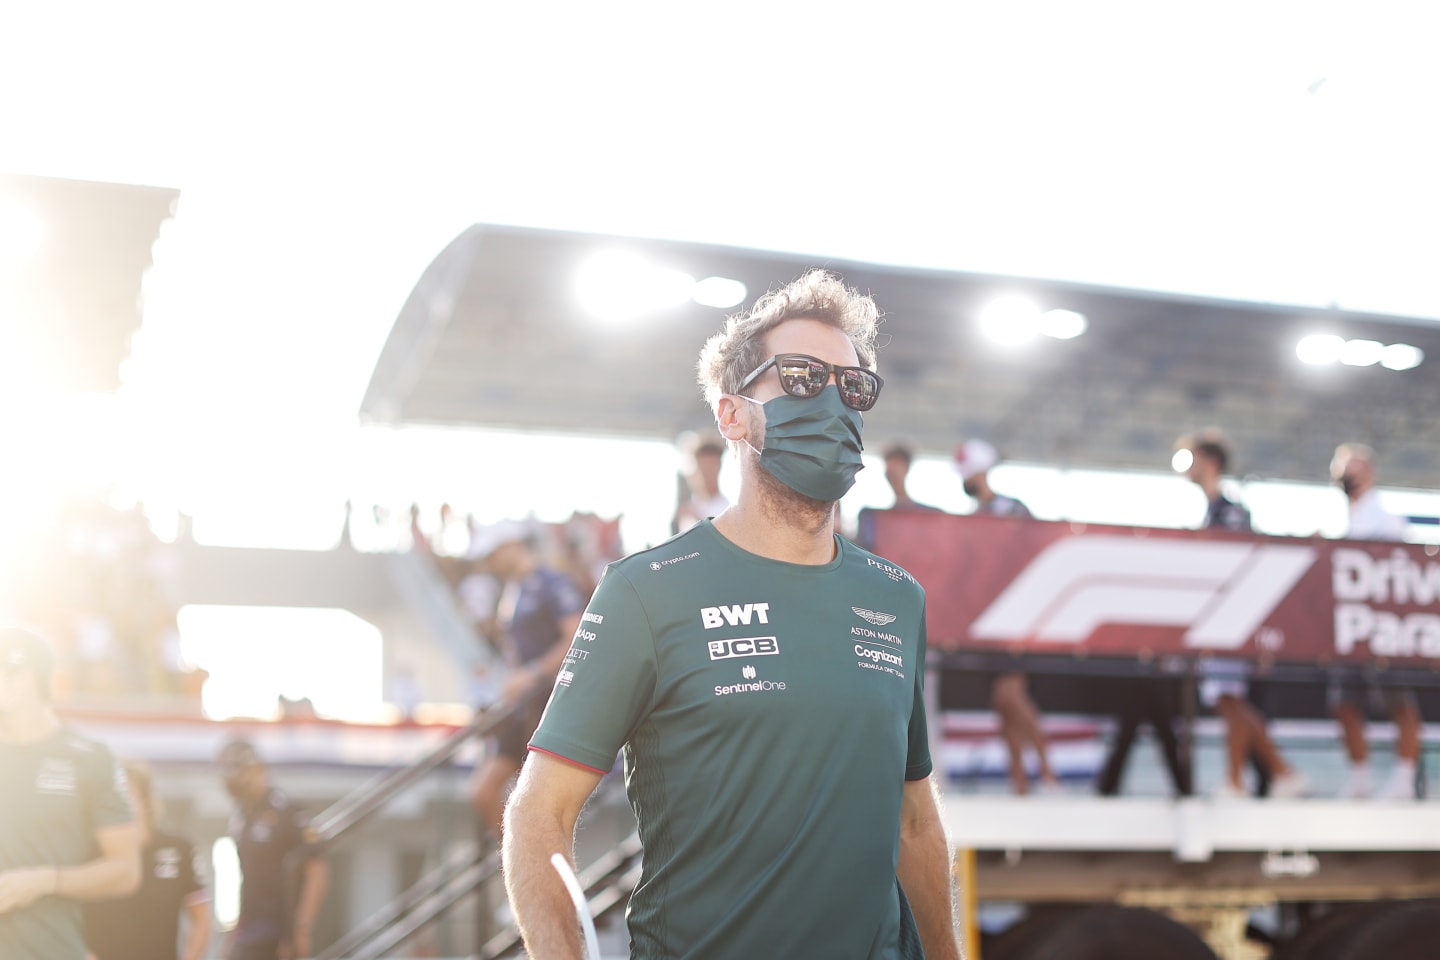 DOHA, QATAR - NOVEMBER 21: Sebastian Vettel of Germany driving the (5) Aston Martin AMR21 Mercedes on his way to the grid before the F1 Grand Prix of Qatar at Losail International Circuit on November 21, 2021 in Doha, Qatar. (Photo by Clive Mason/Getty Images)